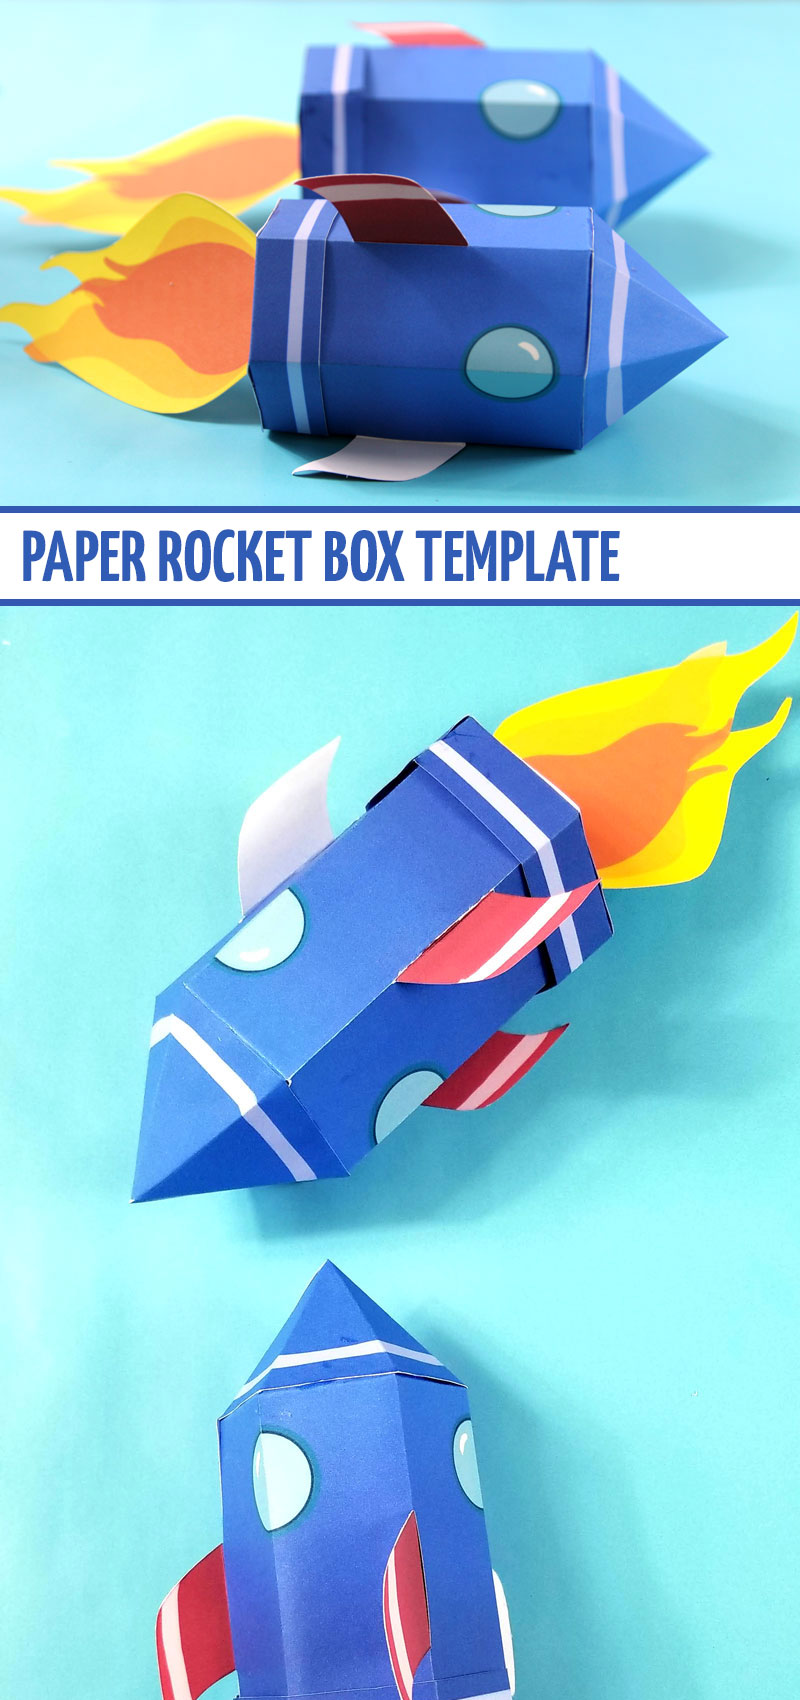 Paper Rocket Template for favor boxes or paper toys!